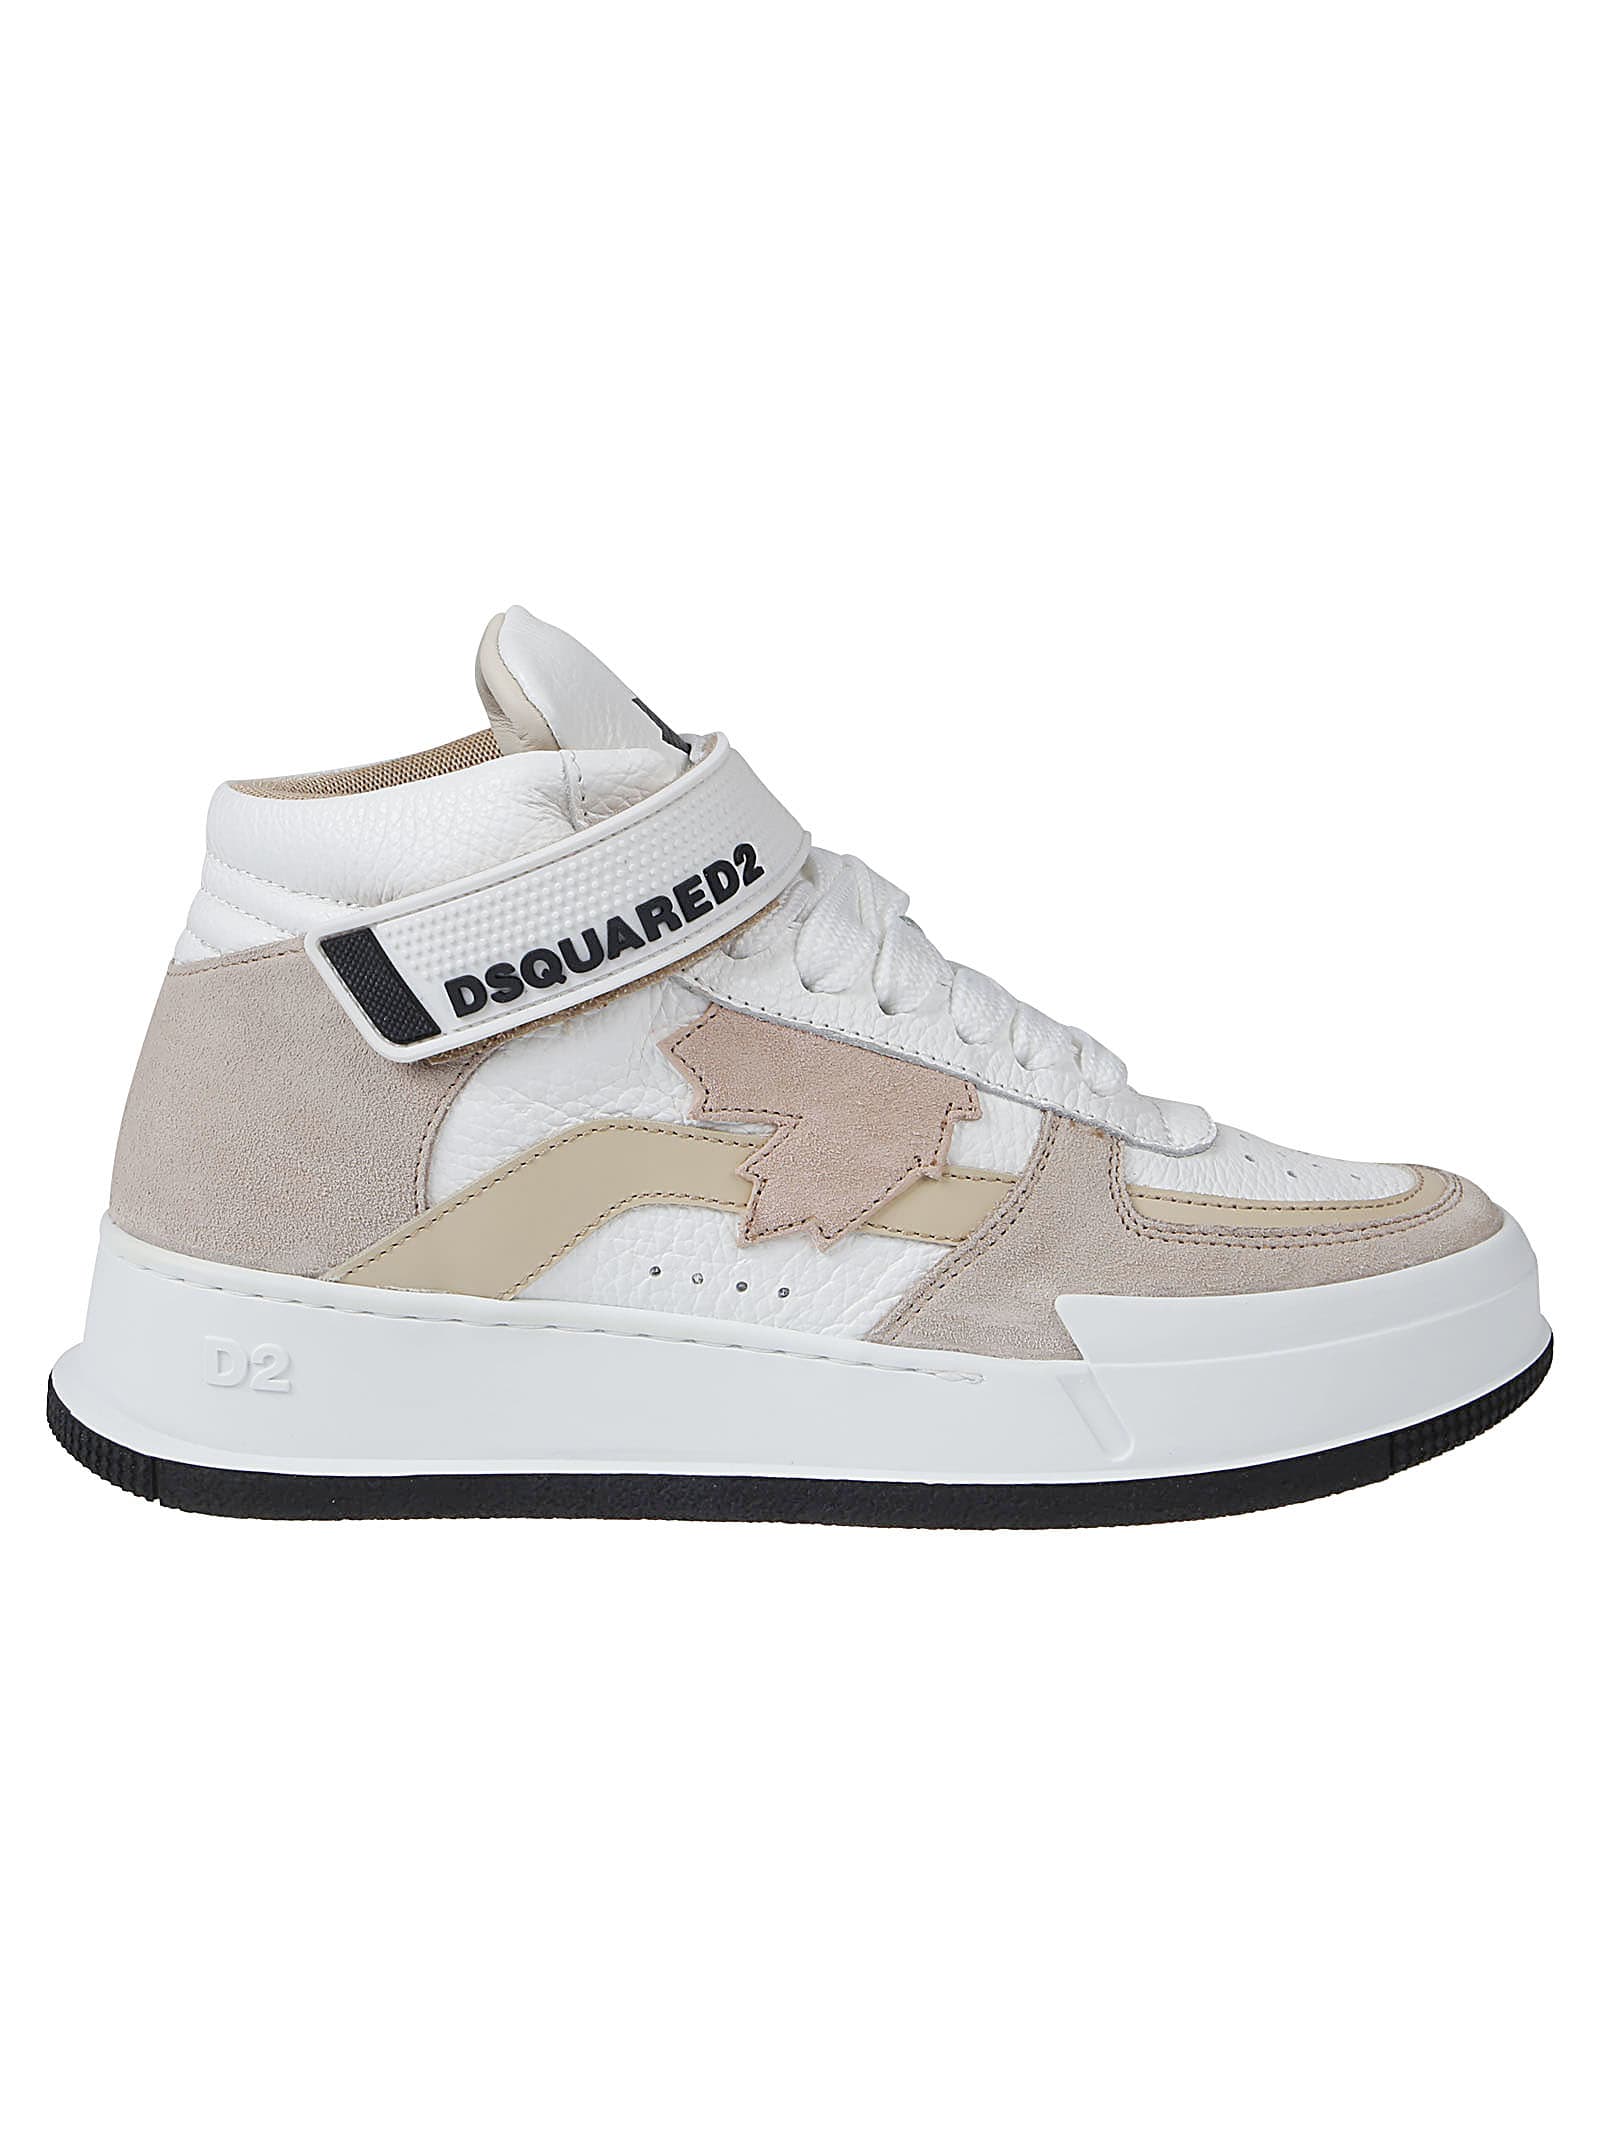 Dsquared2 Canadian High Top Sneakers